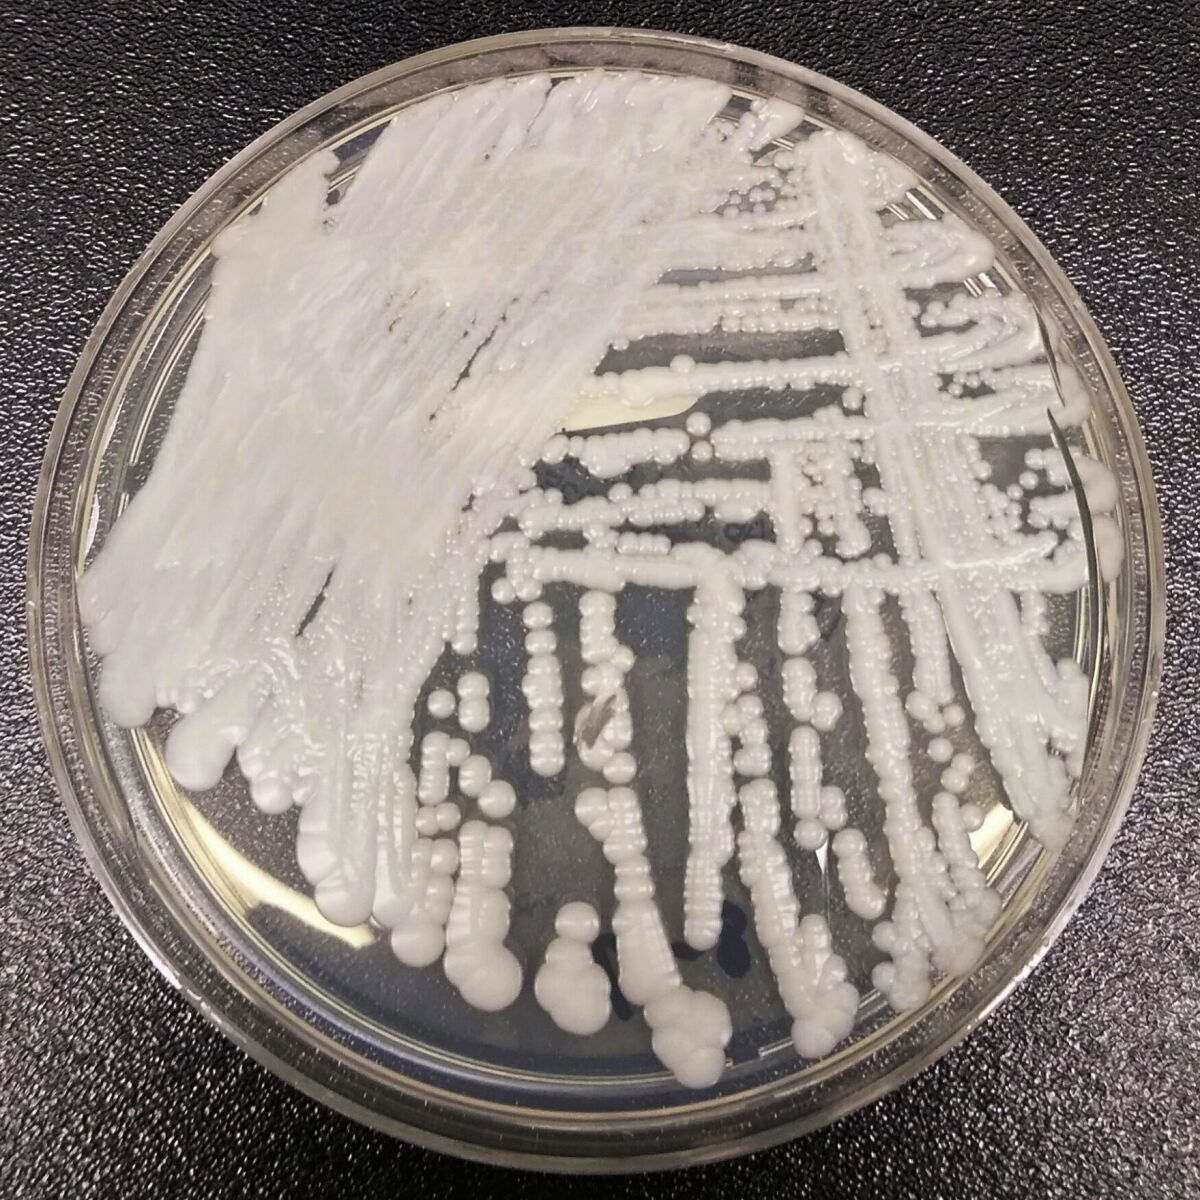 FILE - This 2016 photo made available by the Centers for Disease Control and Prevention shows a strain of Candida auris cultured in a petri dish at a CDC laboratory. A hospital in New Orleans says, Wednesday, Jan. 19, 2022, it has identified two patients infected with a rare, drug-resistant fungus — the first time it's been found in Louisiana. Candida auris has already been found in Washington, D.C., and at least 20 other states including Georgia, Florida and Texas, according to the Centers for Disease Control and Prevention. The fungus is a harmful form of yeast that can be resistant to the most common antifungal drugs. (Shawn Lockhart/CDC via AP)